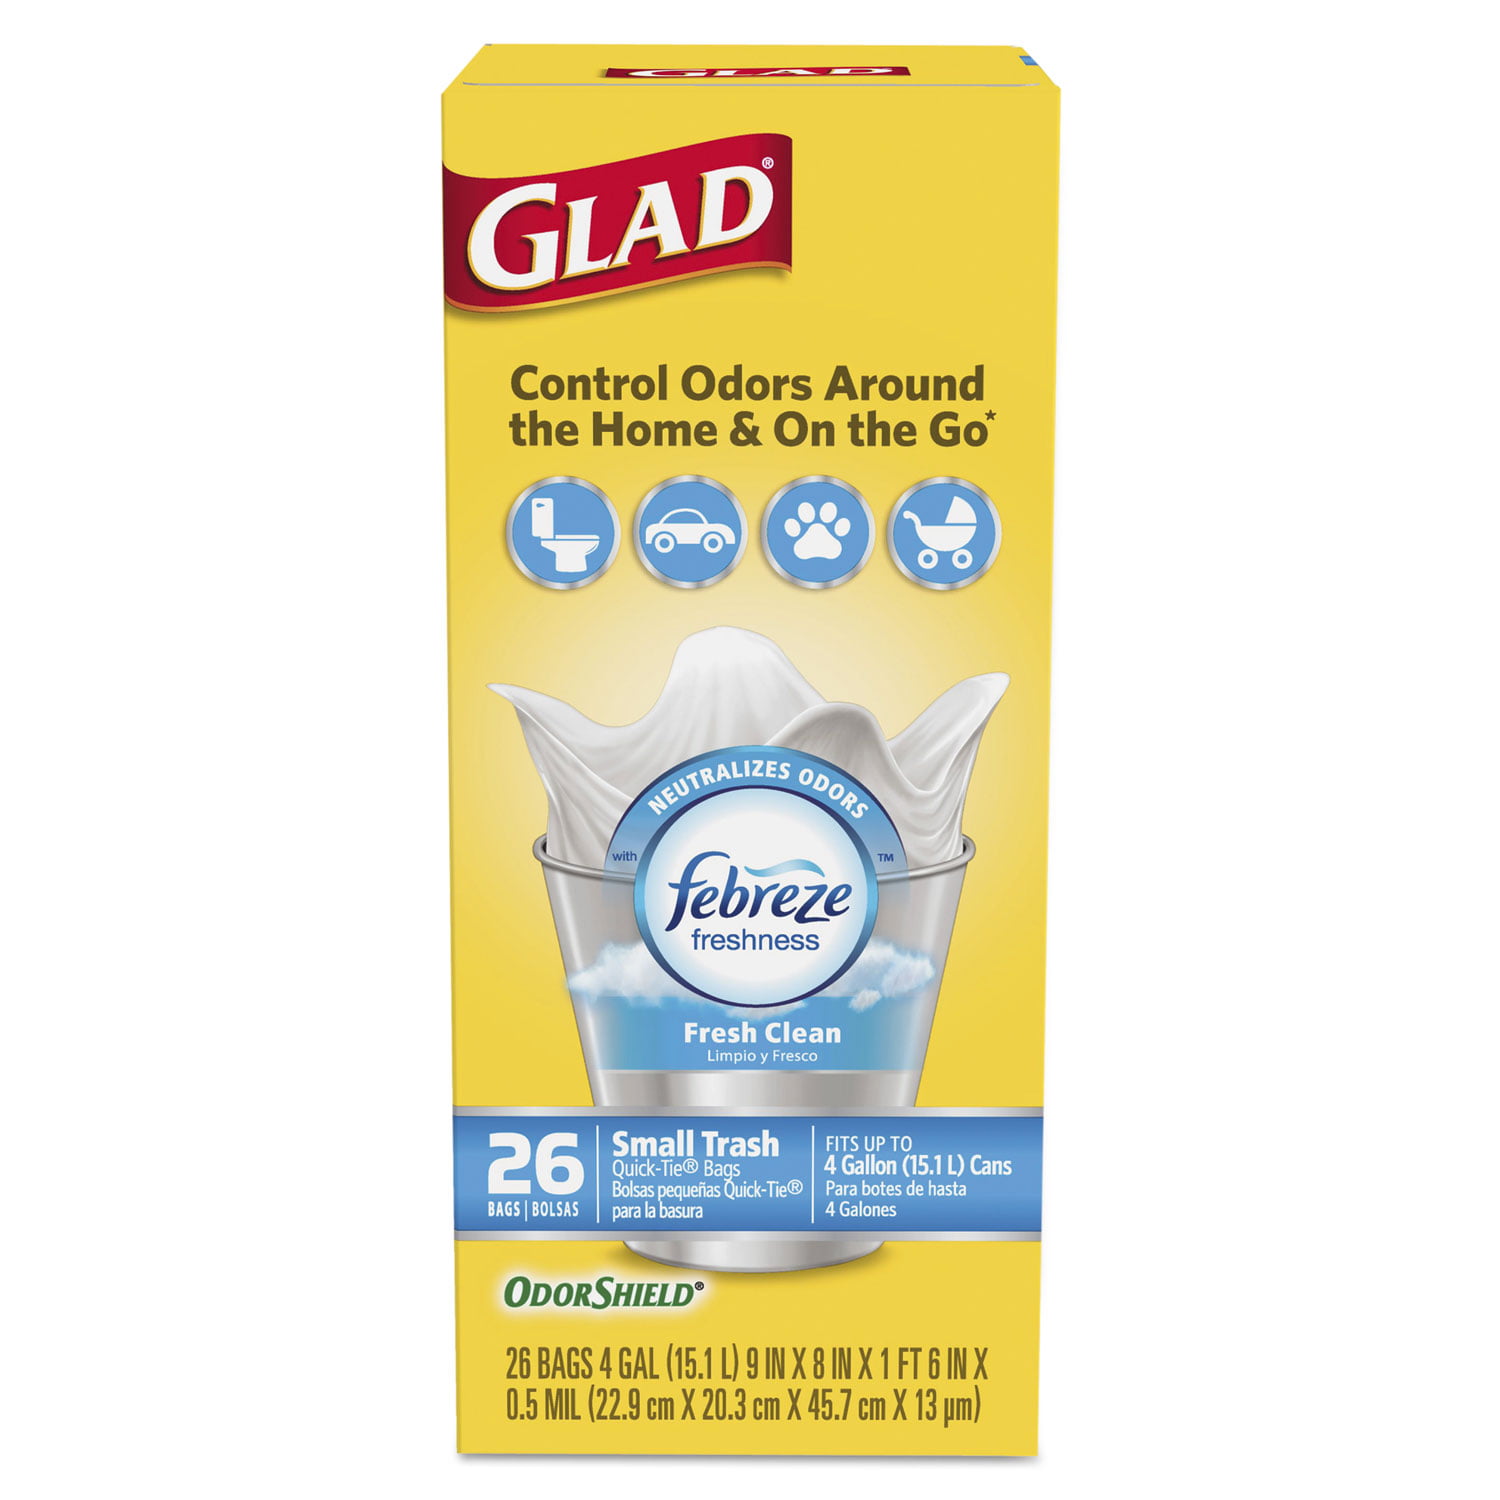 Glad® OdorShield® Small Trash Bags, Fresh Clean Scent with Febreze  Freshness, 4 Gallon White Trash Bag, 156 Count, Shop